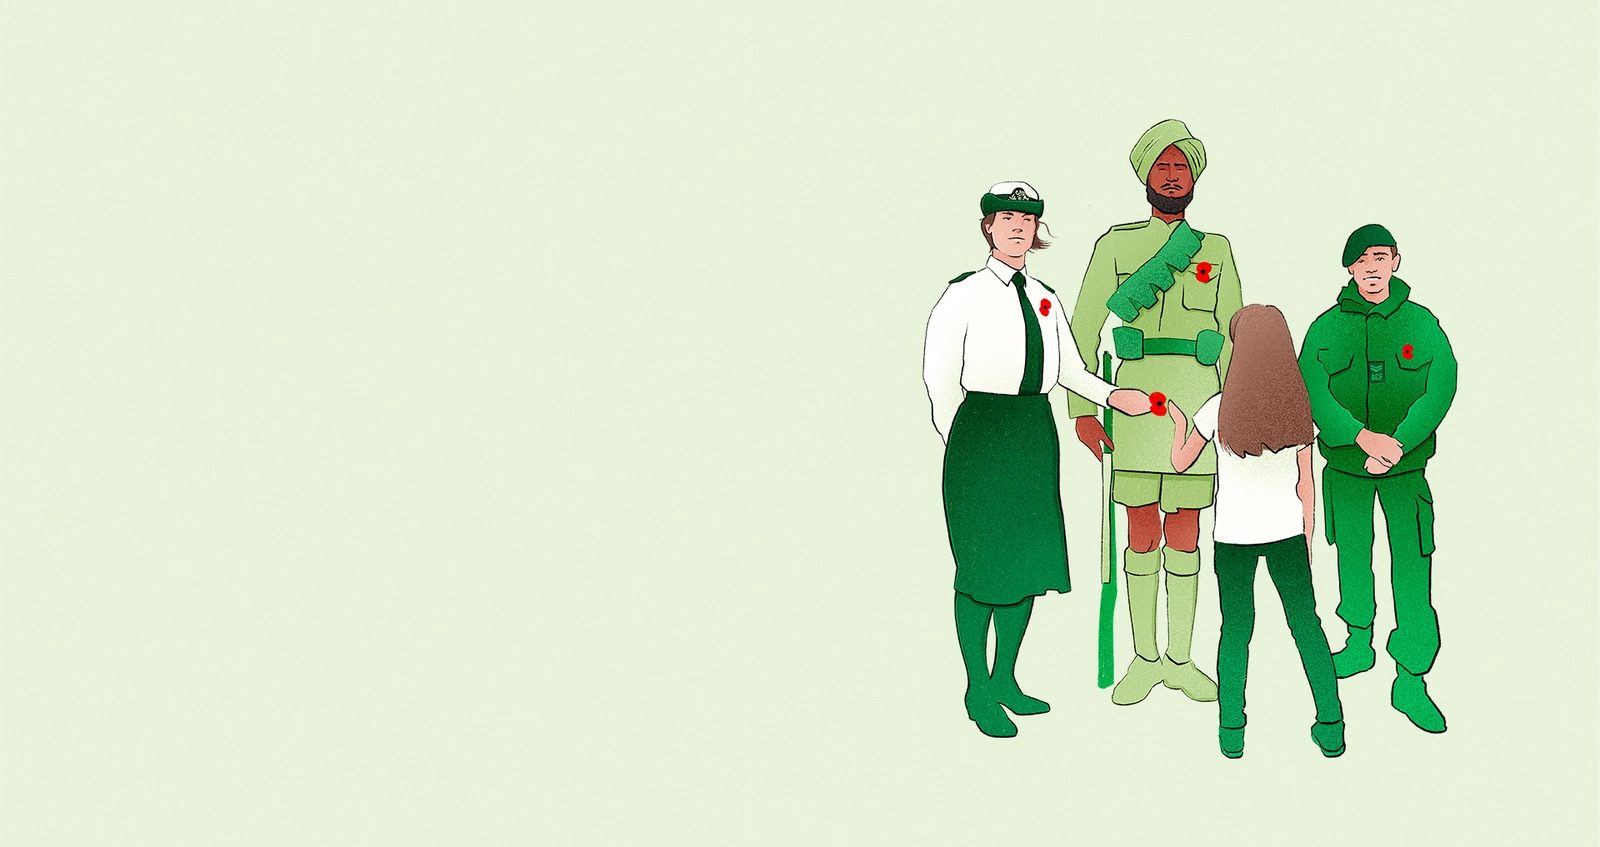 Green graphic with military figures